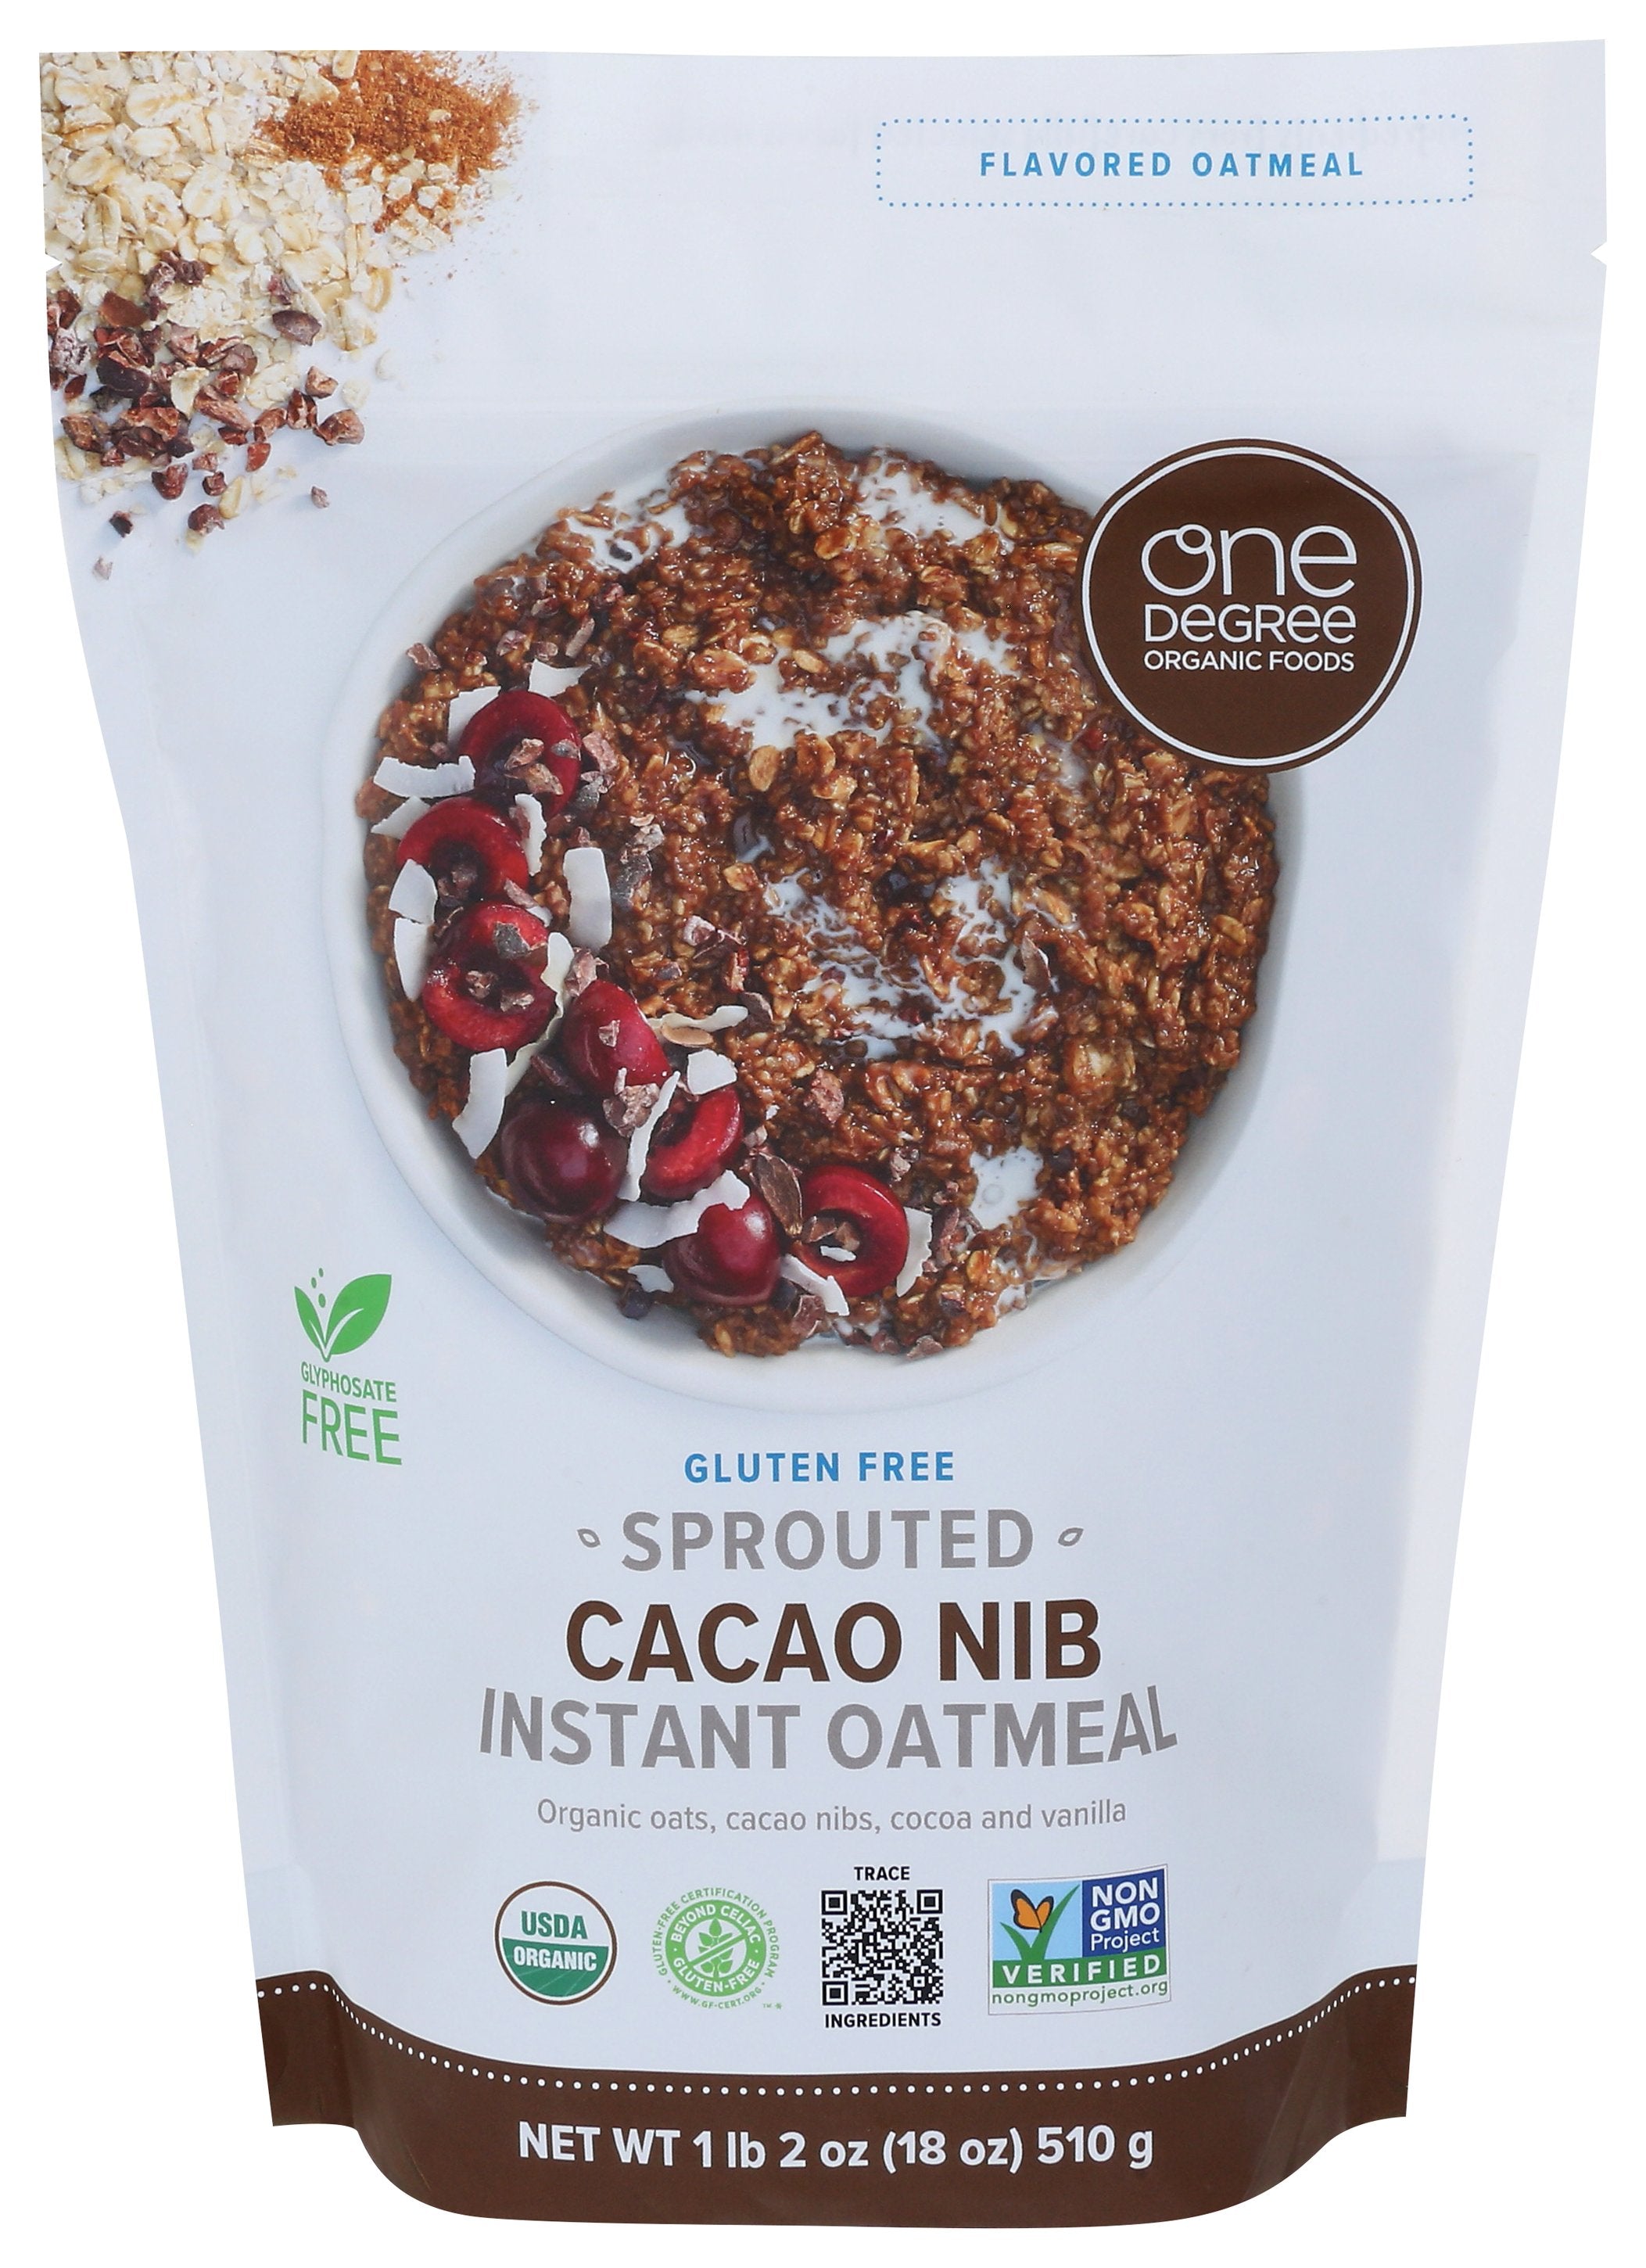 ONE DEGREE ORG OATS SPRTD CACAO NIB - Case of 6